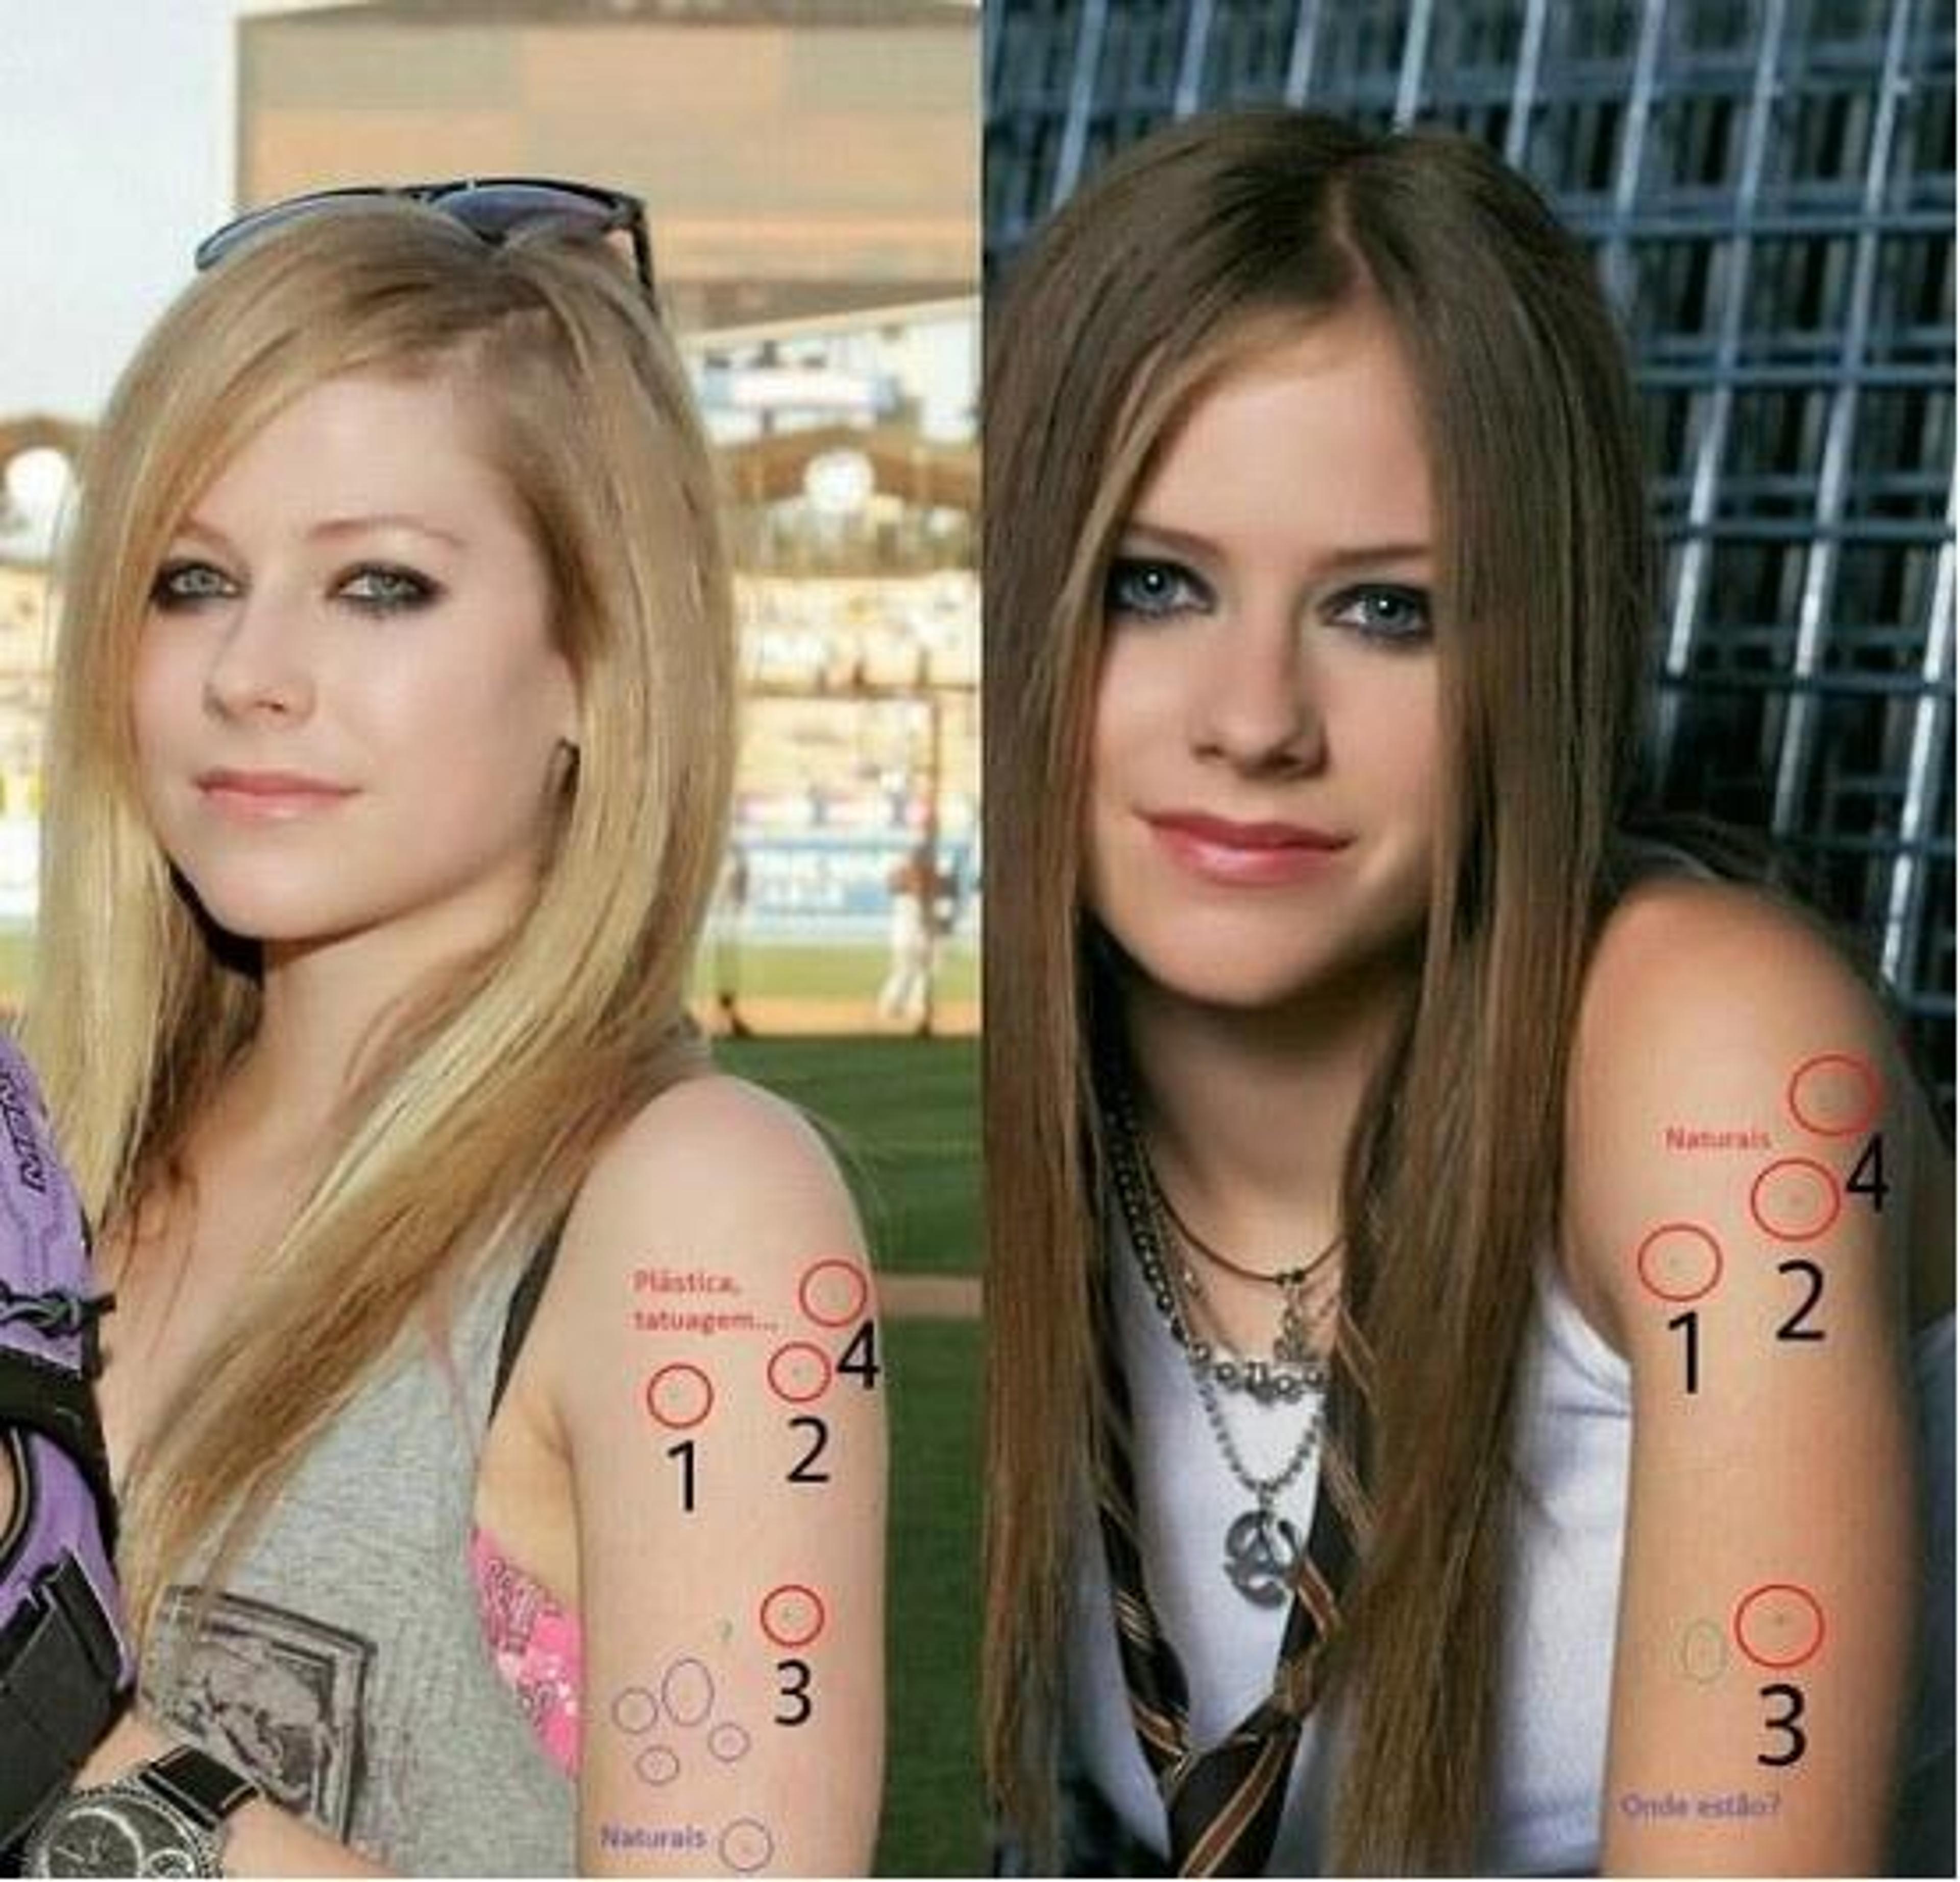 Fan-made "evidence" of Avril Lavigne Replacement Theory